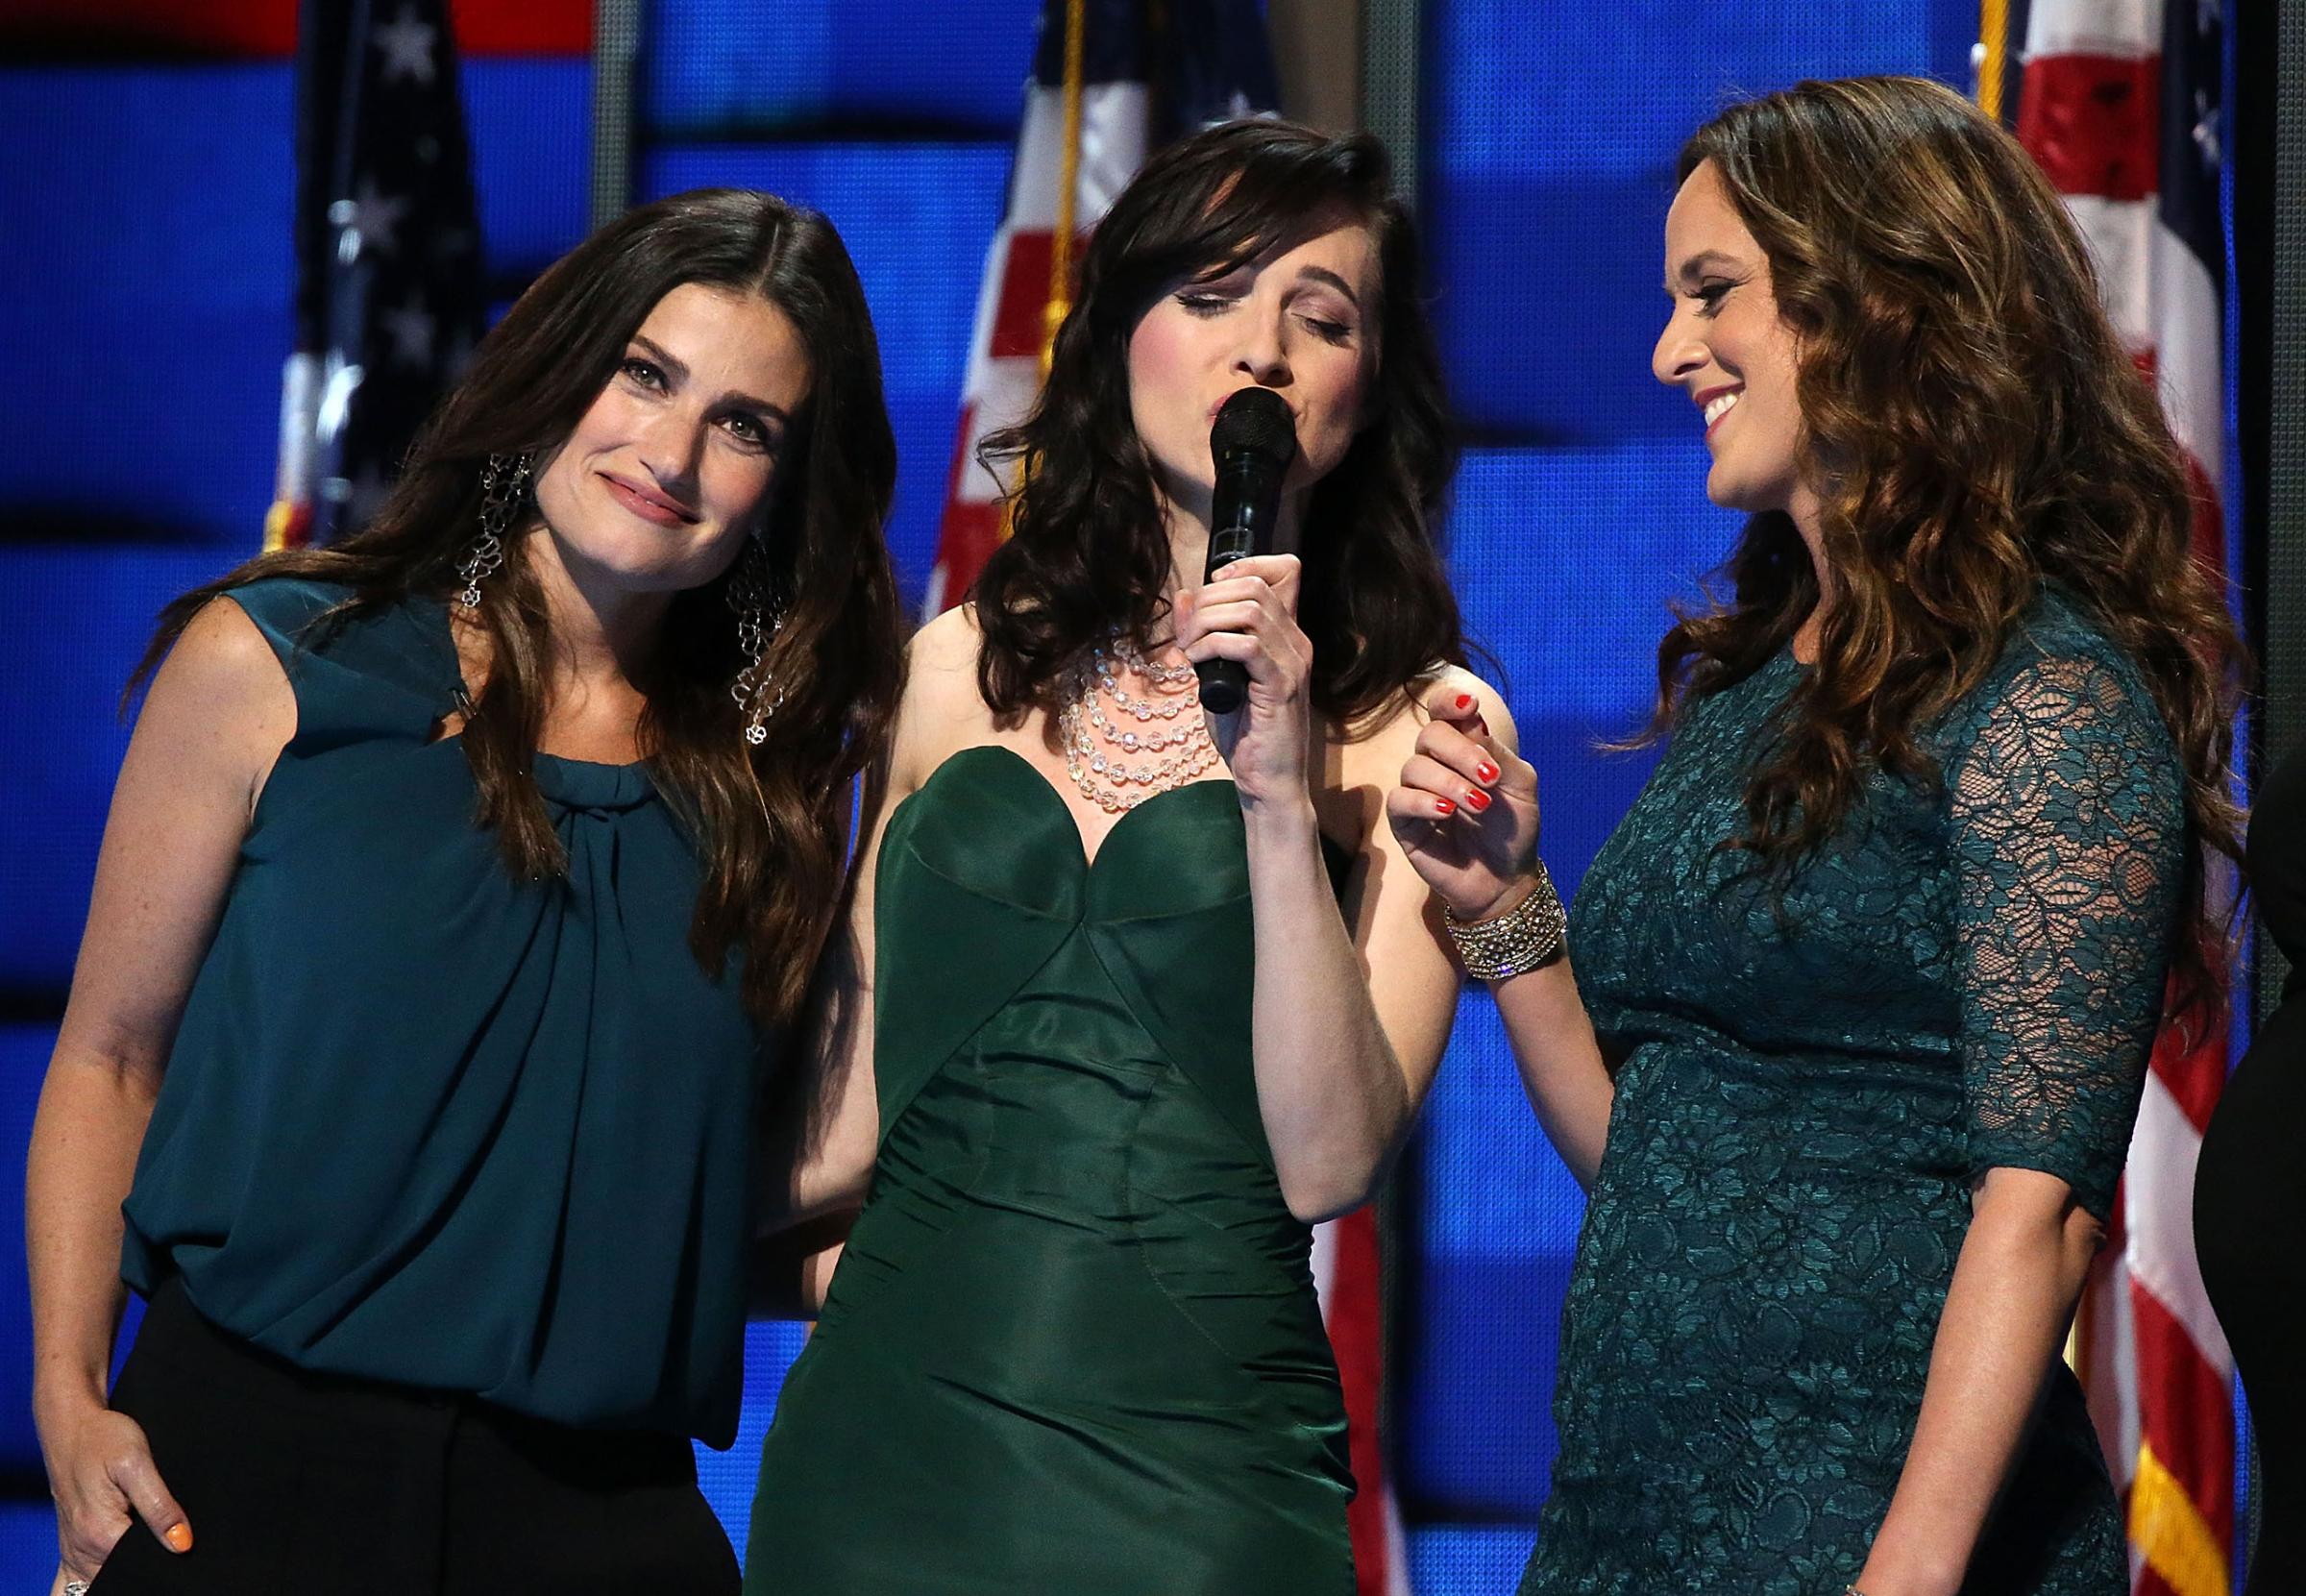 Singer Idina Menzel (L) joins the Stars of Broadway to perform 'What the World Needs Now' honoring those killed in the Pulse nightclub shooting in Orlando on the third day of the Democratic National Convention at the Wells Fargo Center in Philadelphia, Pennsylvania, on July 27, 2016.